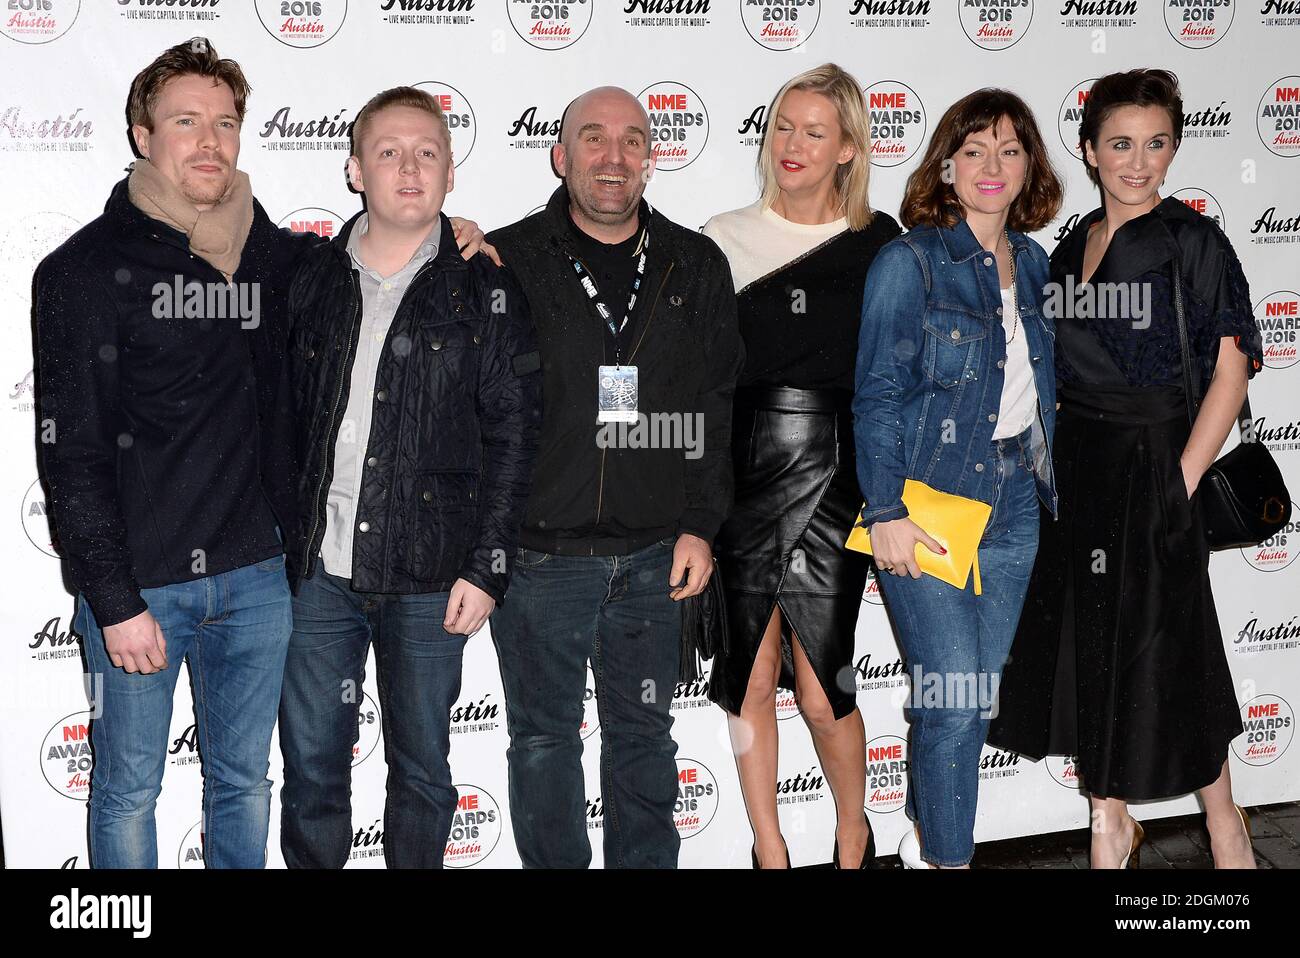 (L - R) Joe Dempsie, Tho,as Turgoose, Shane Meadows, Guest, Jo Hartley and Vicky McClure attending the NME Awards 2016 with Austin, Texas at the O2 Brixton Academy, London.  Stock Photo